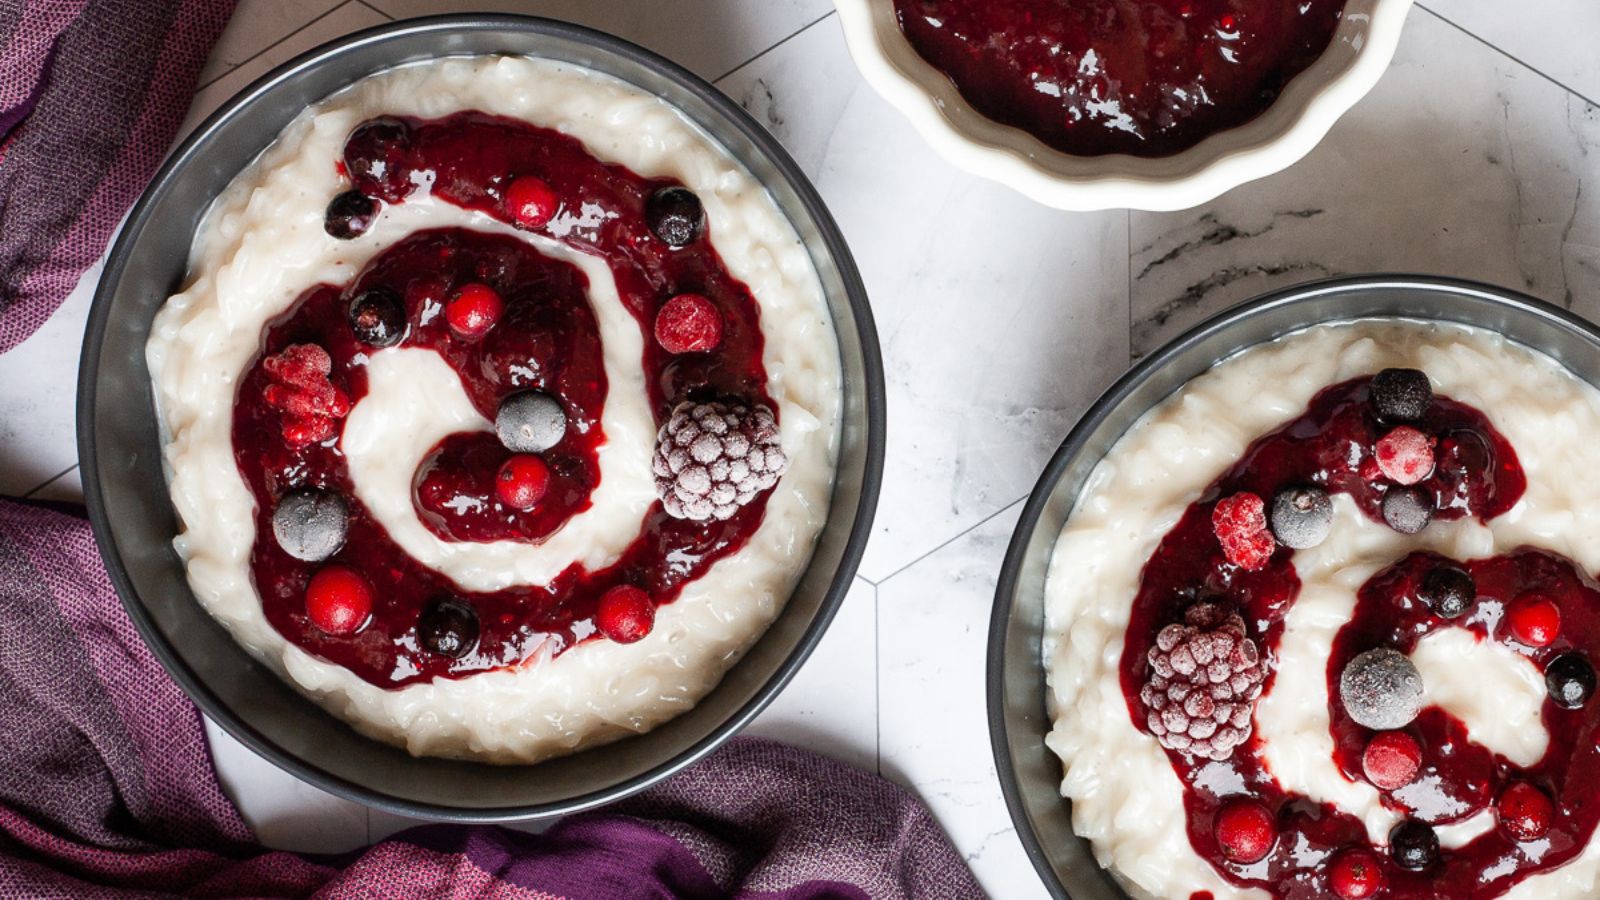 Savor Your Weekend: 18 Unforgettable Desserts to Delight Your Palate